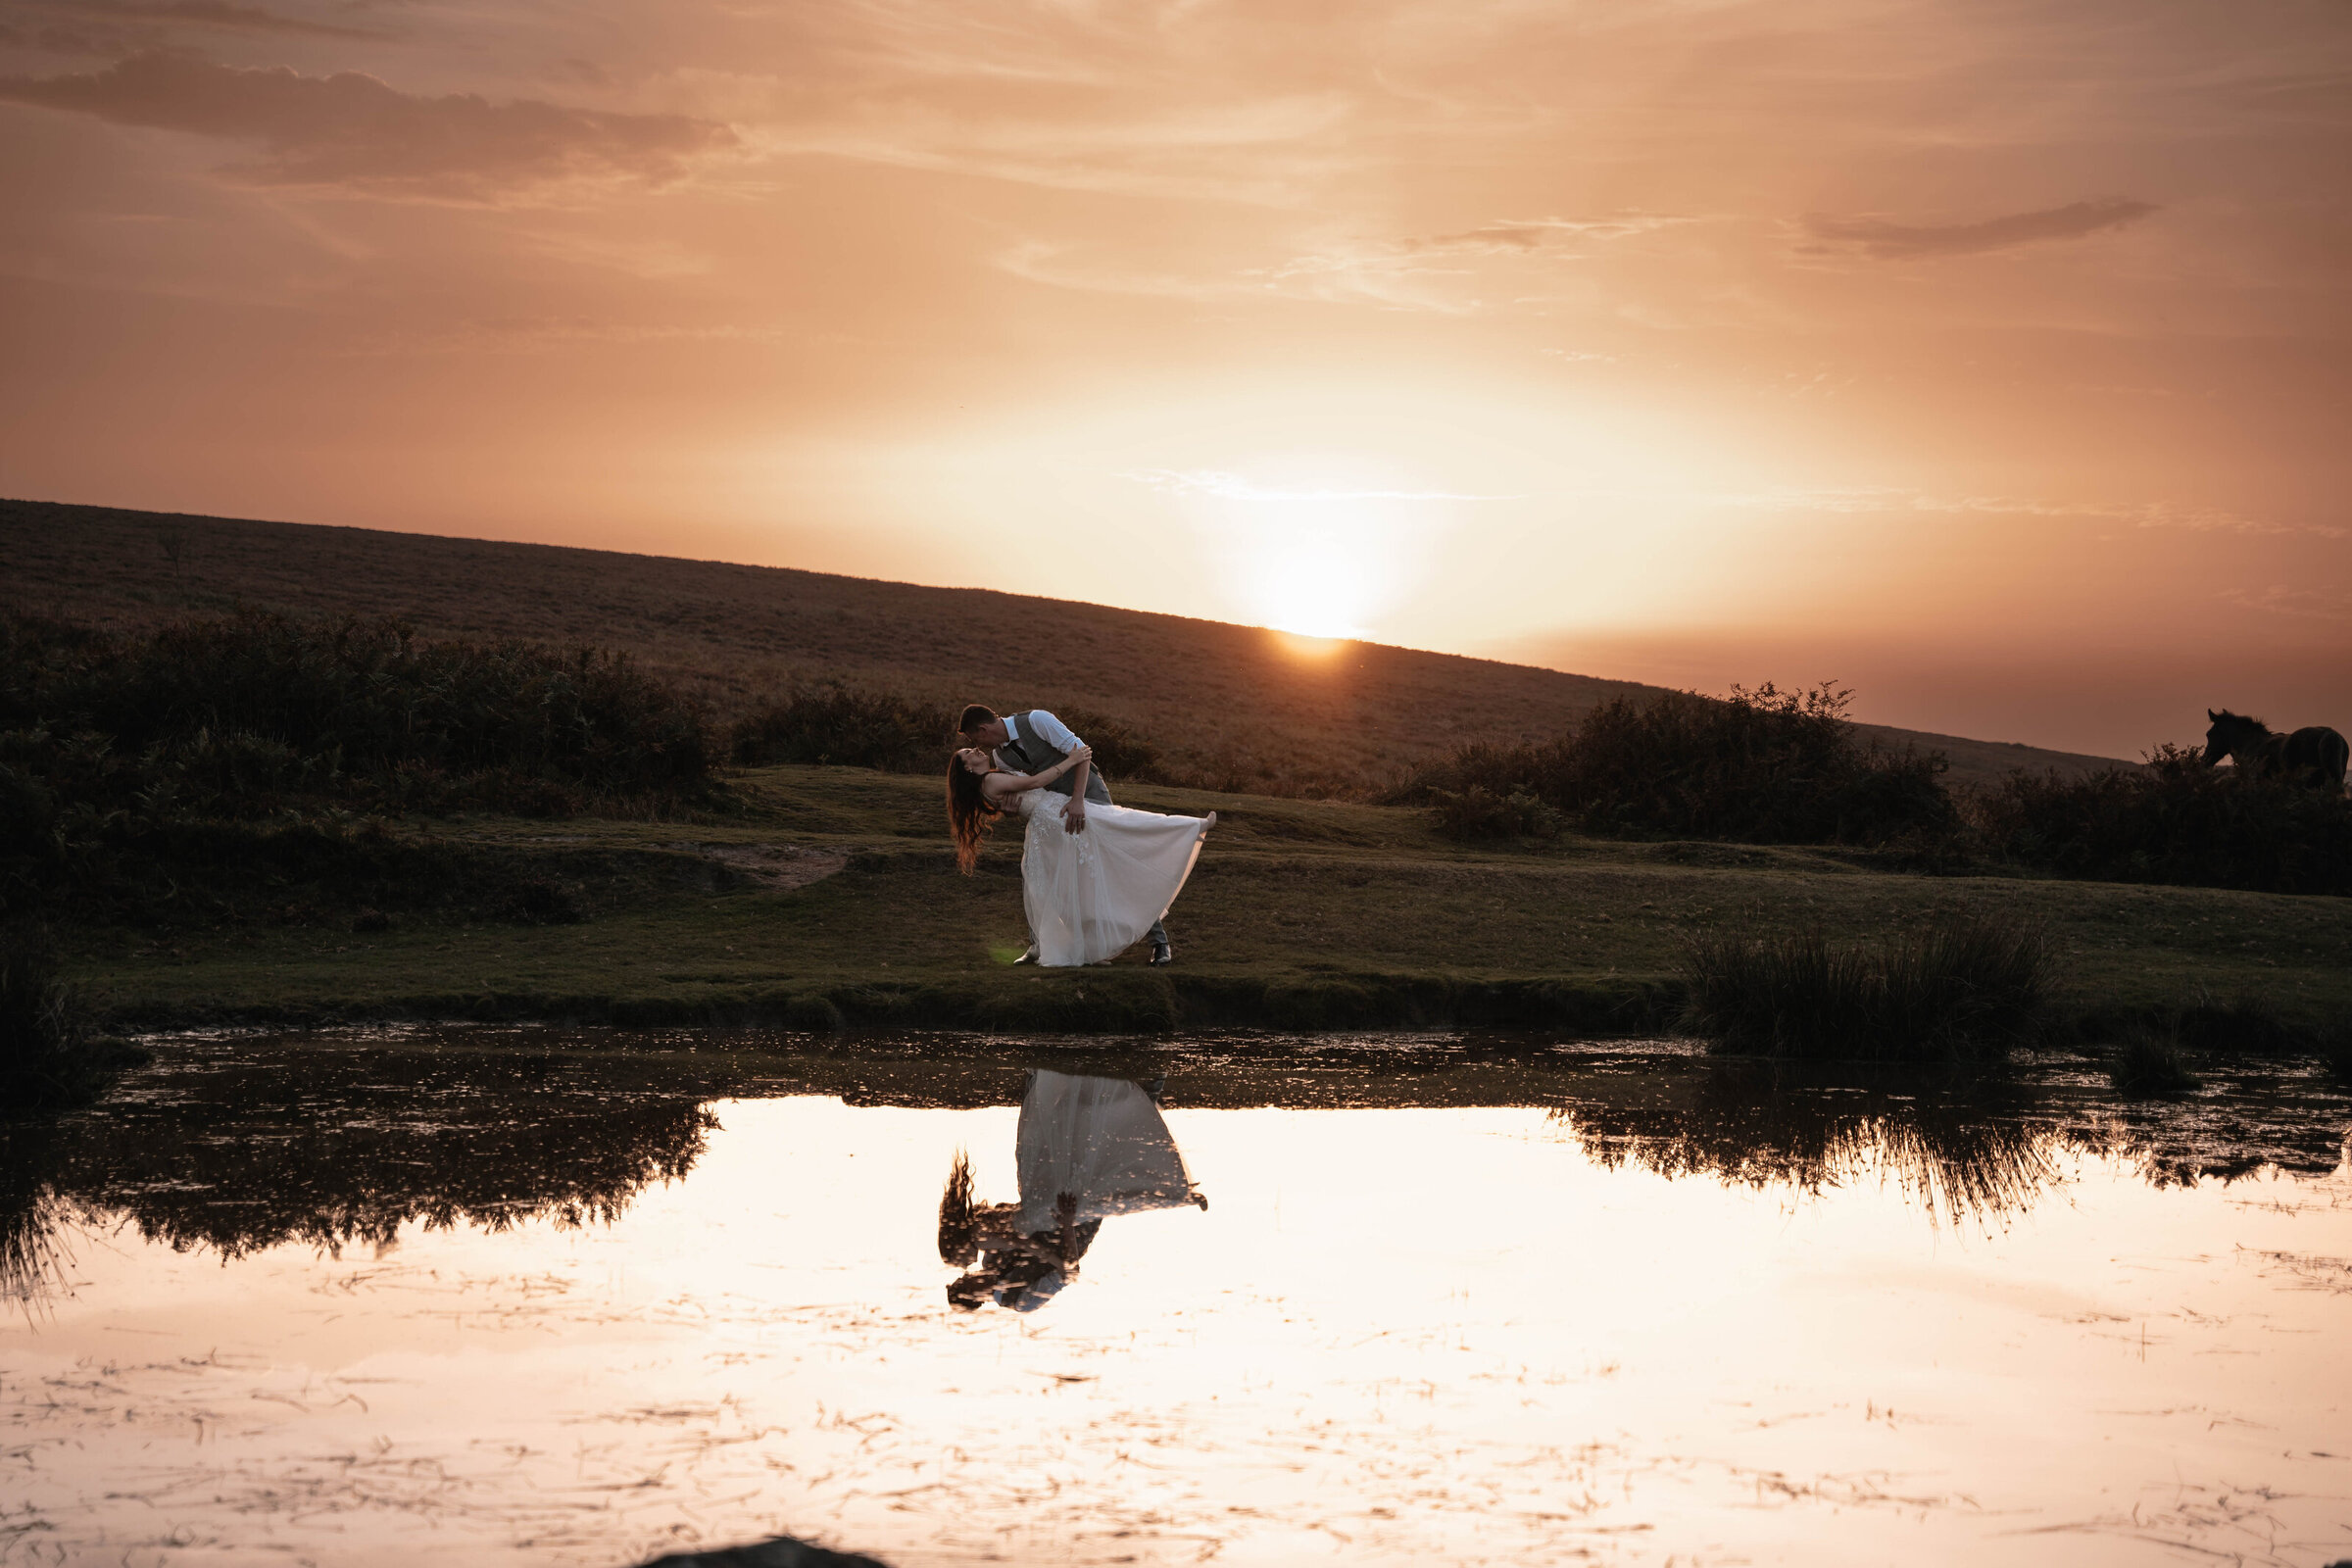 Bride and Groom in wedding attire having a dip kiss in front of a pond with a golden sunset in the background